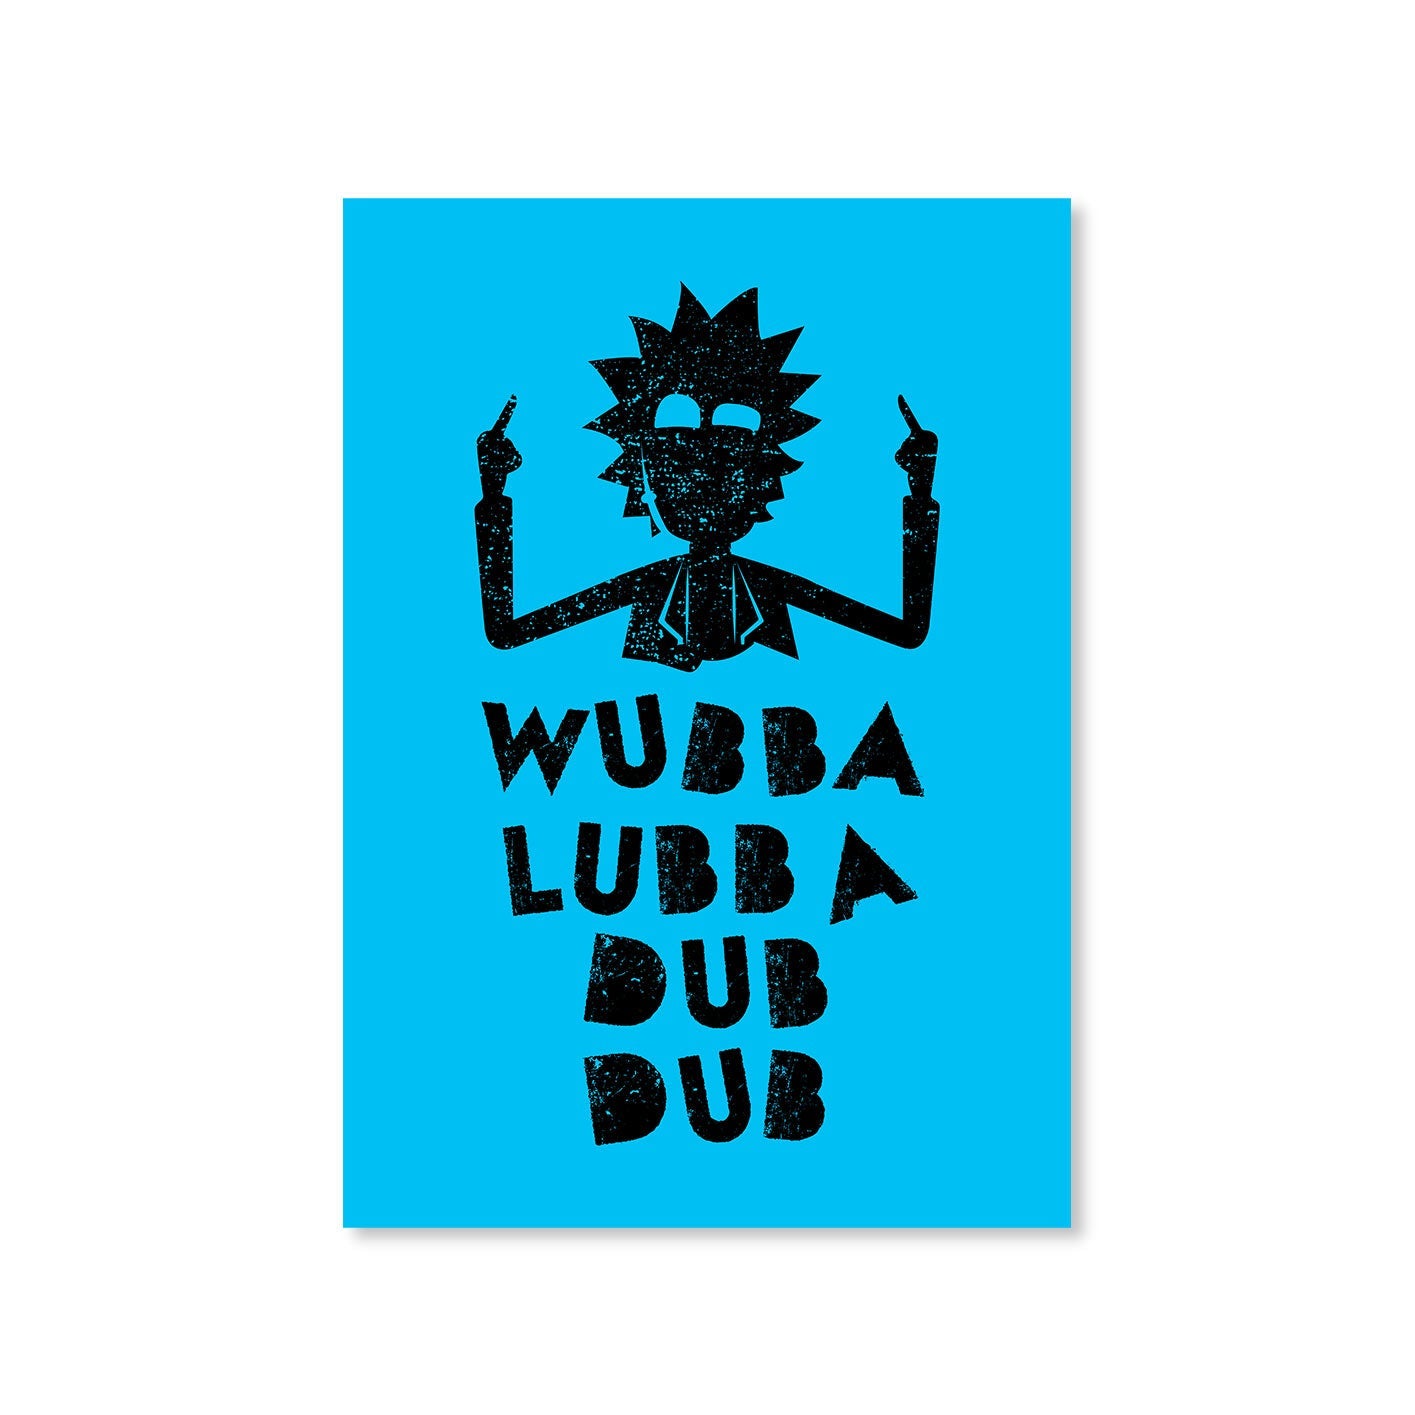 rick and morty wubba lubba dub dub poster wall art buy online india the banyan tee tbt a4 rick and morty online summer beth mr meeseeks jerry quote vector art clothing accessories merchandise